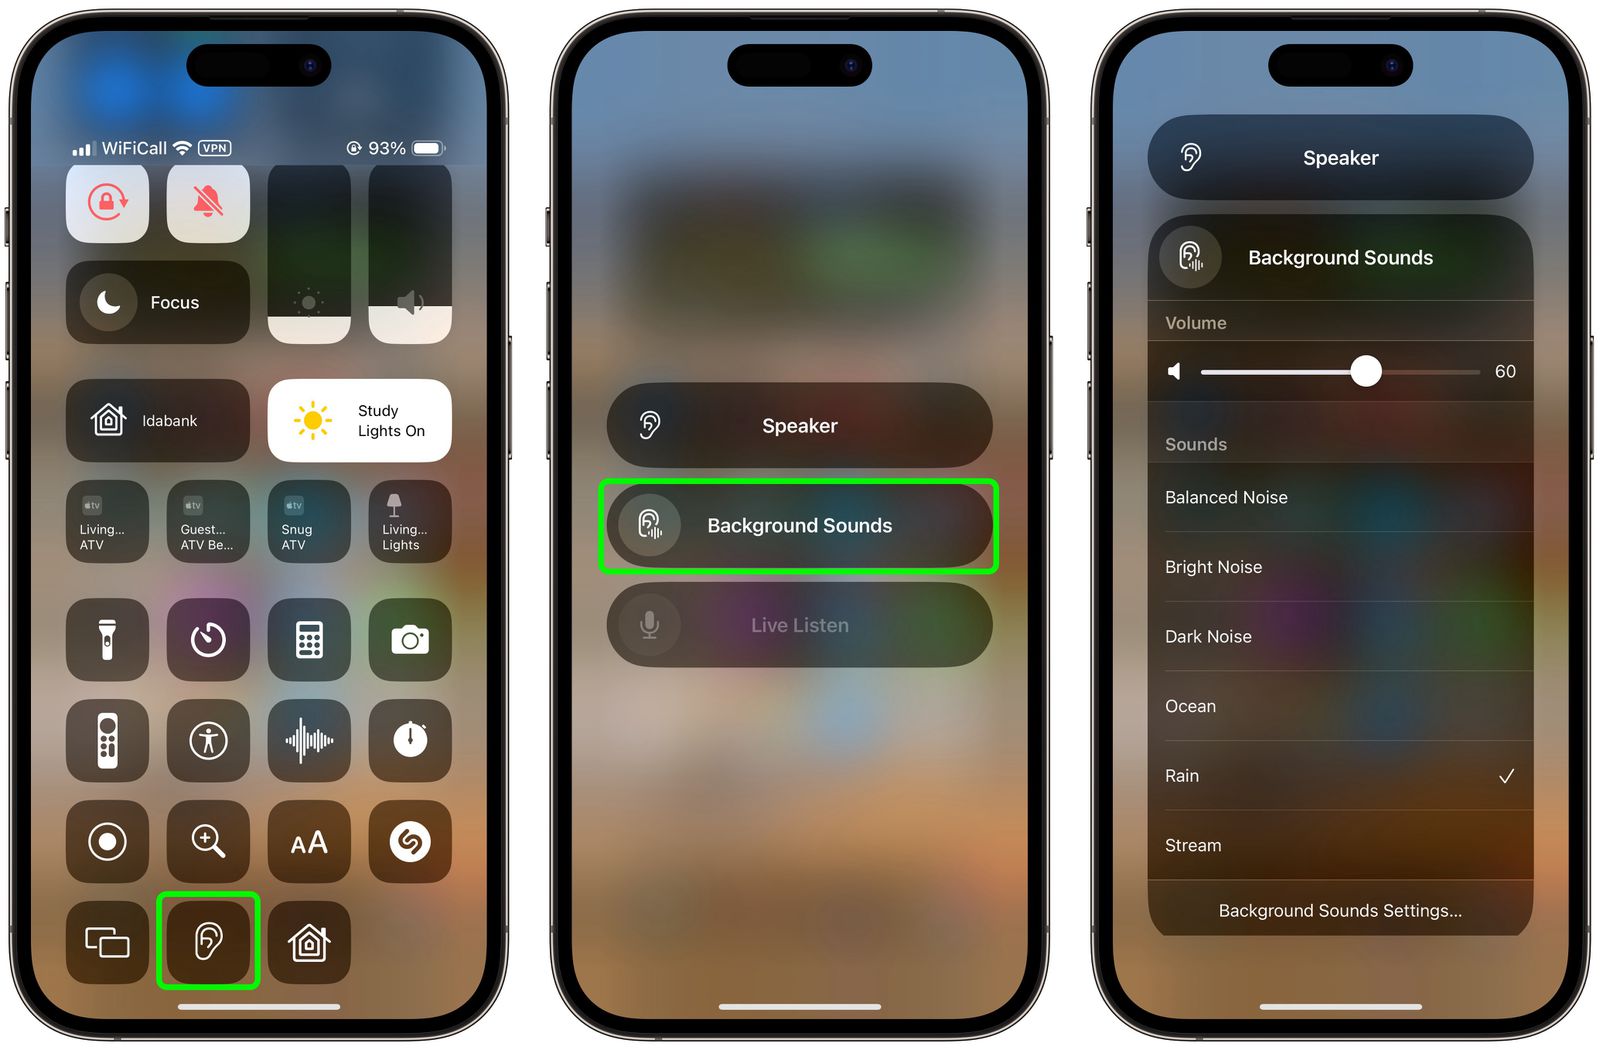 Play Ambient Background Sounds on iPhone to Stay Focused - MacRumors